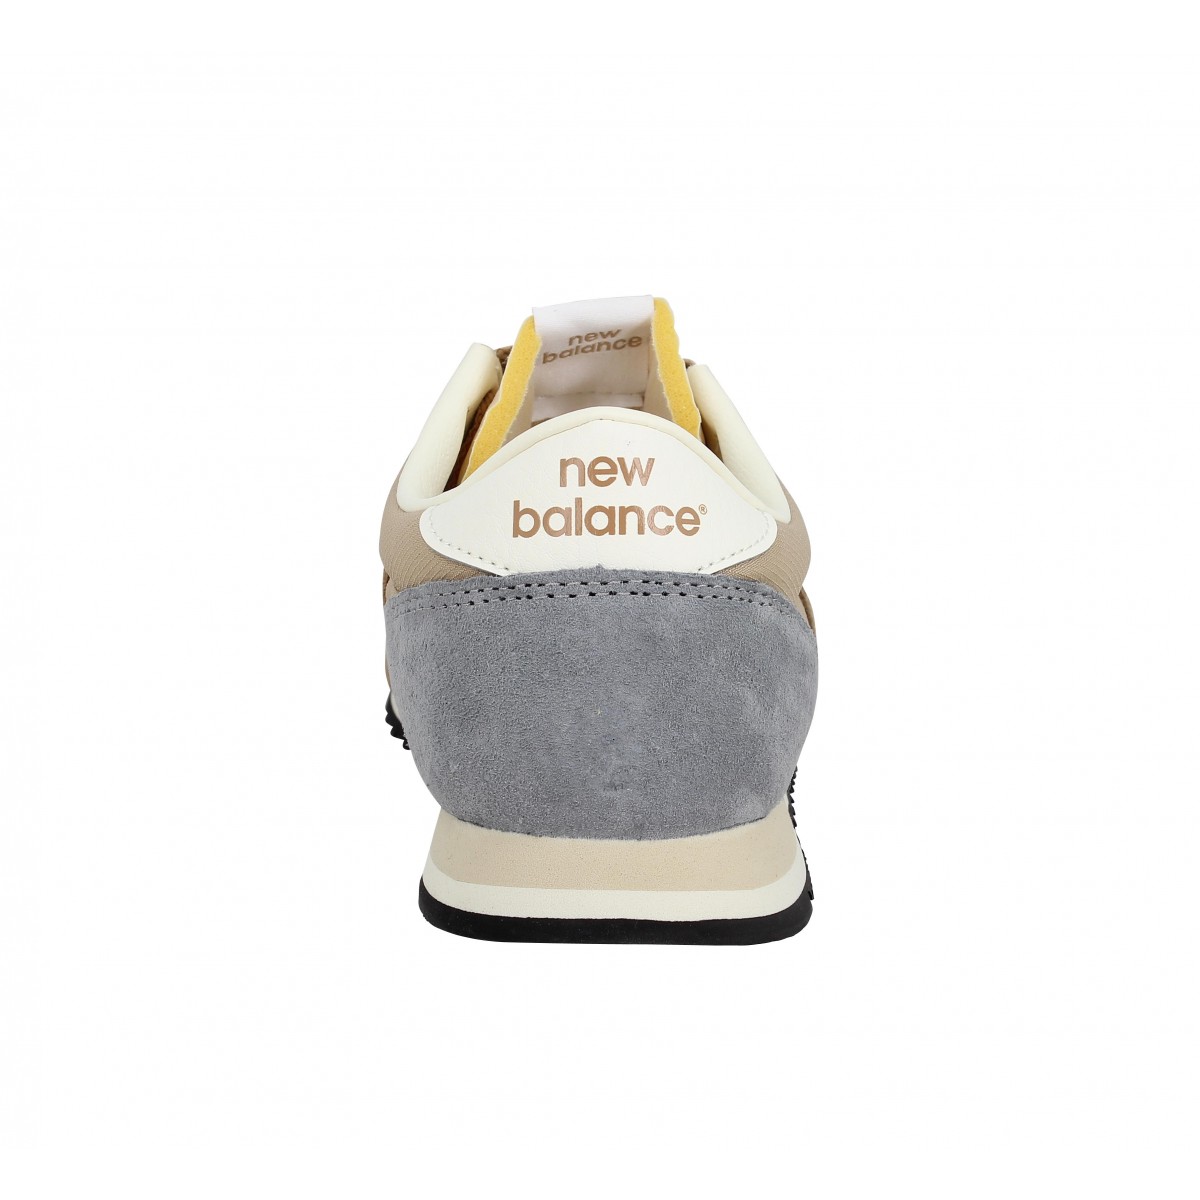 referir China Excluir New balance 420 velours toile femme beige gris | Fanny chaussures